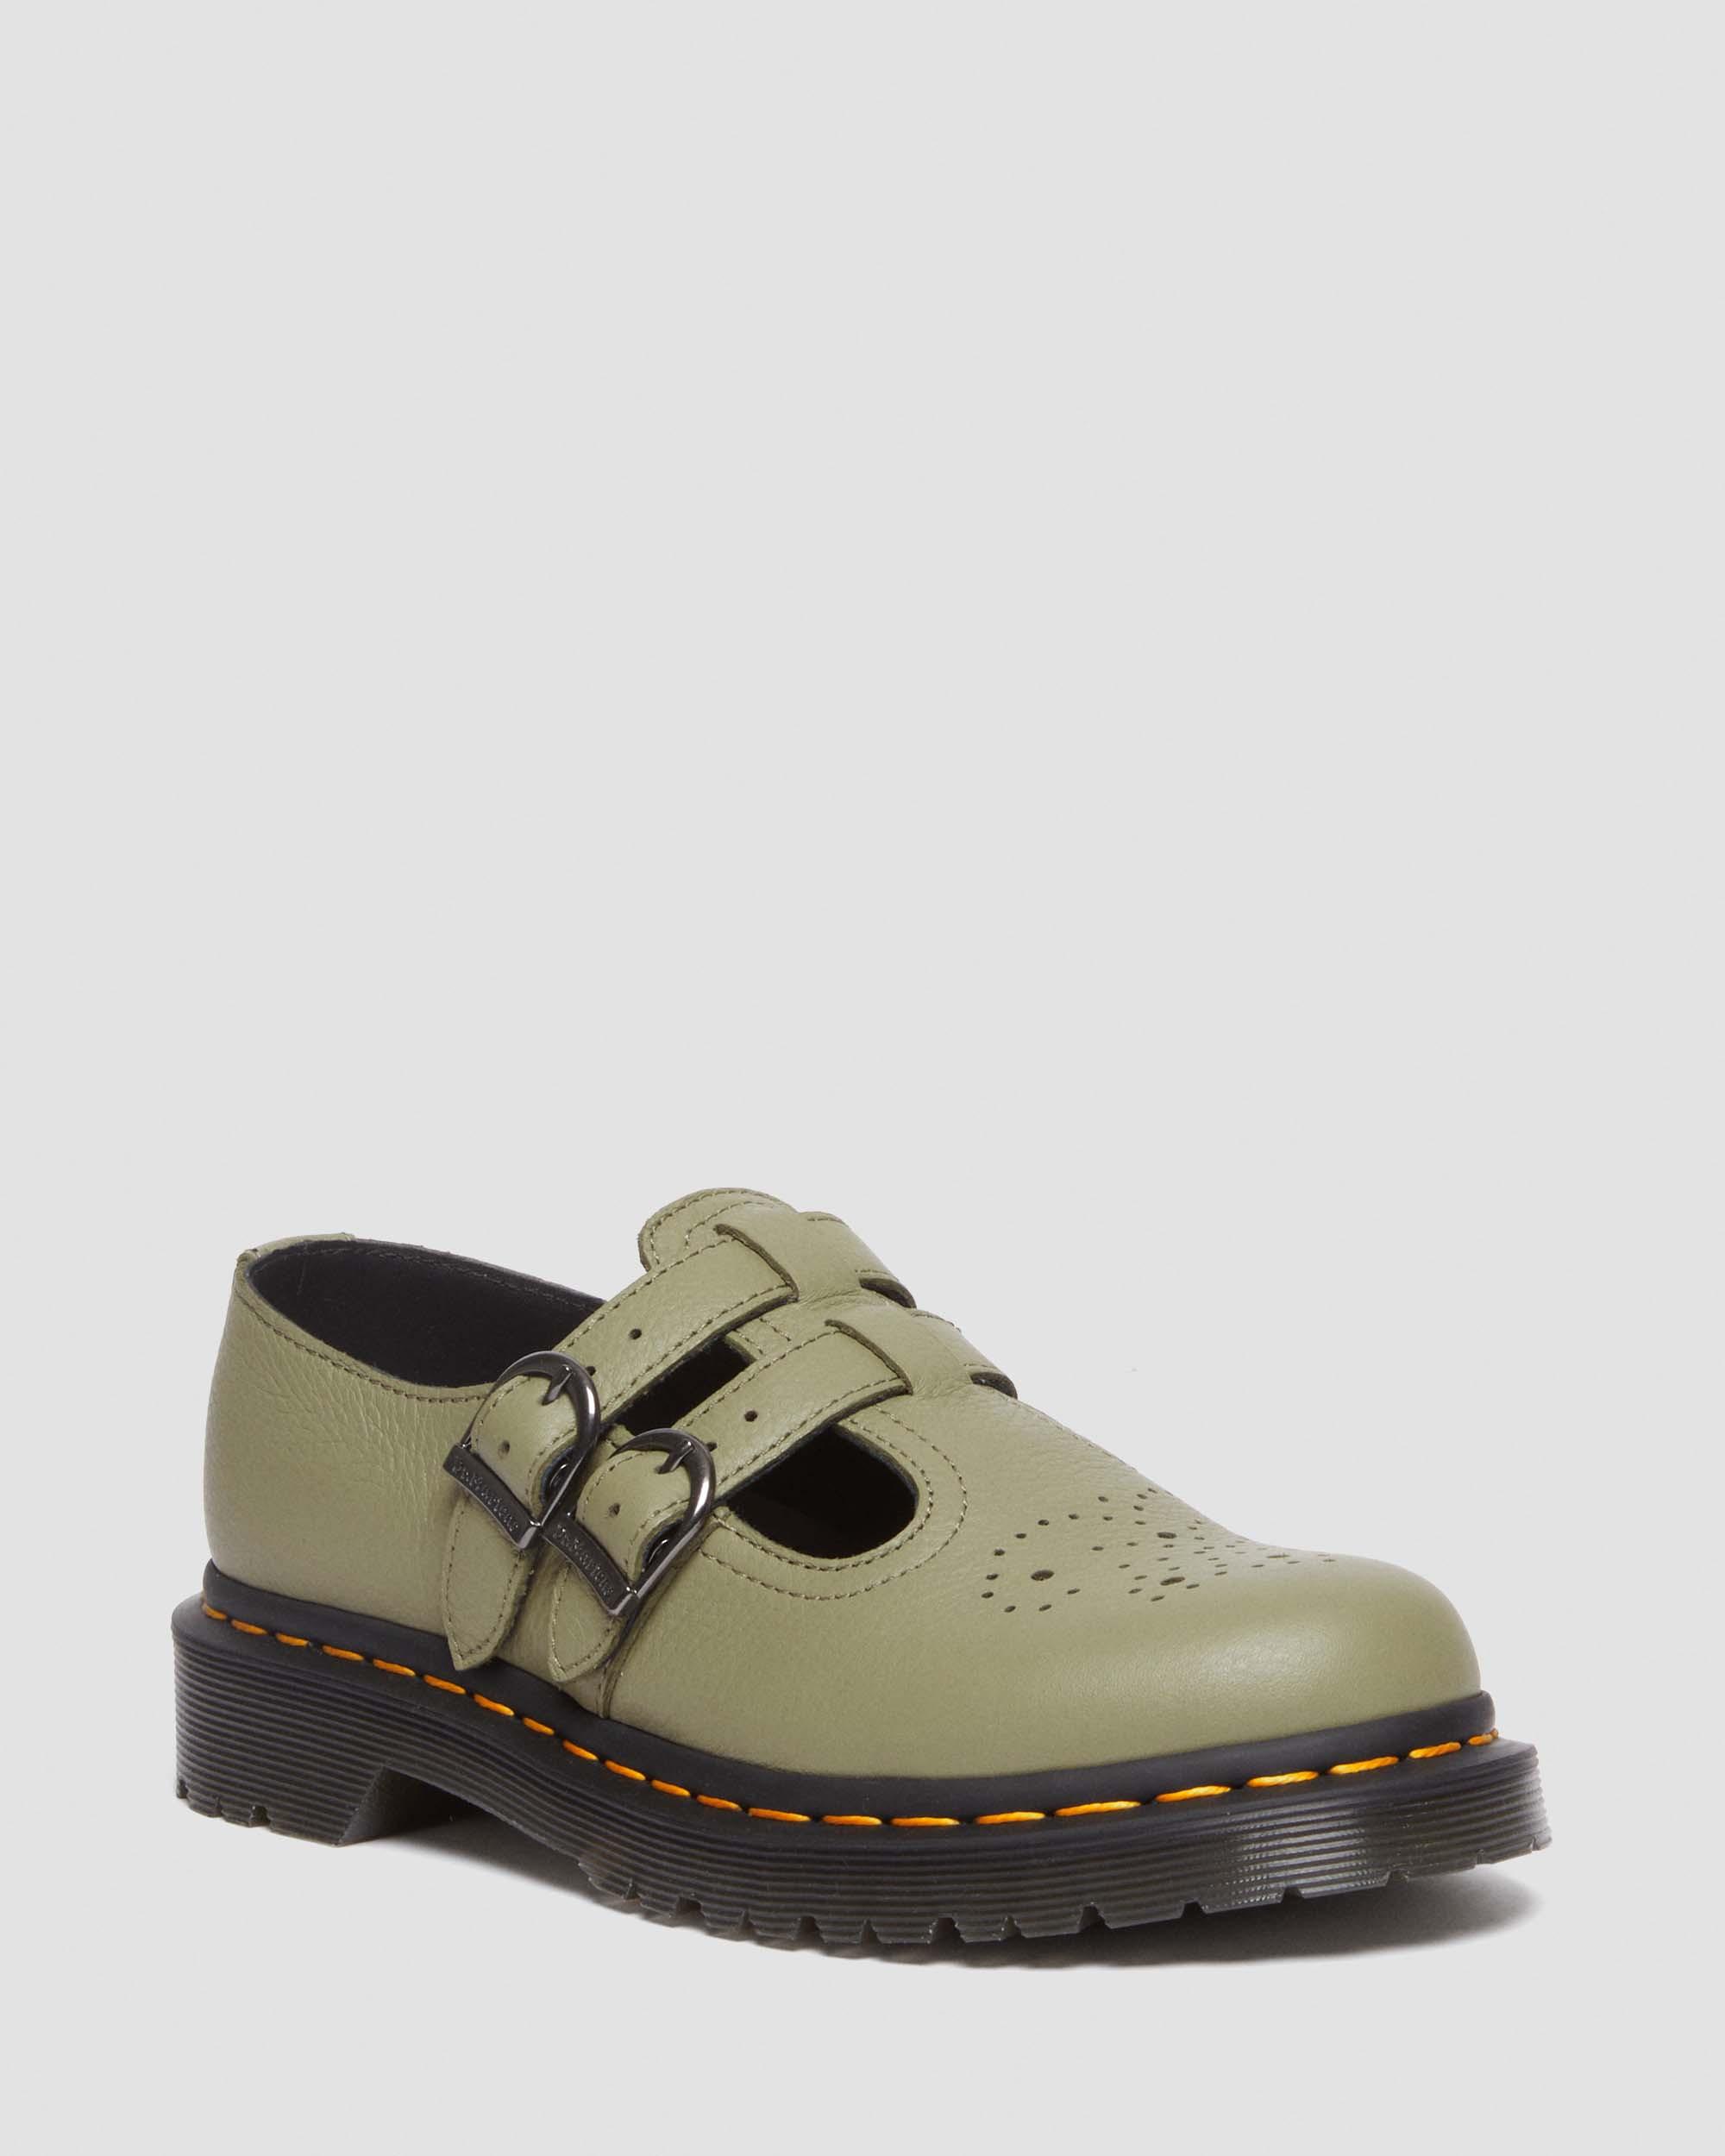 8065 Mary Jane Virginia Leather Shoes in Muted Olive